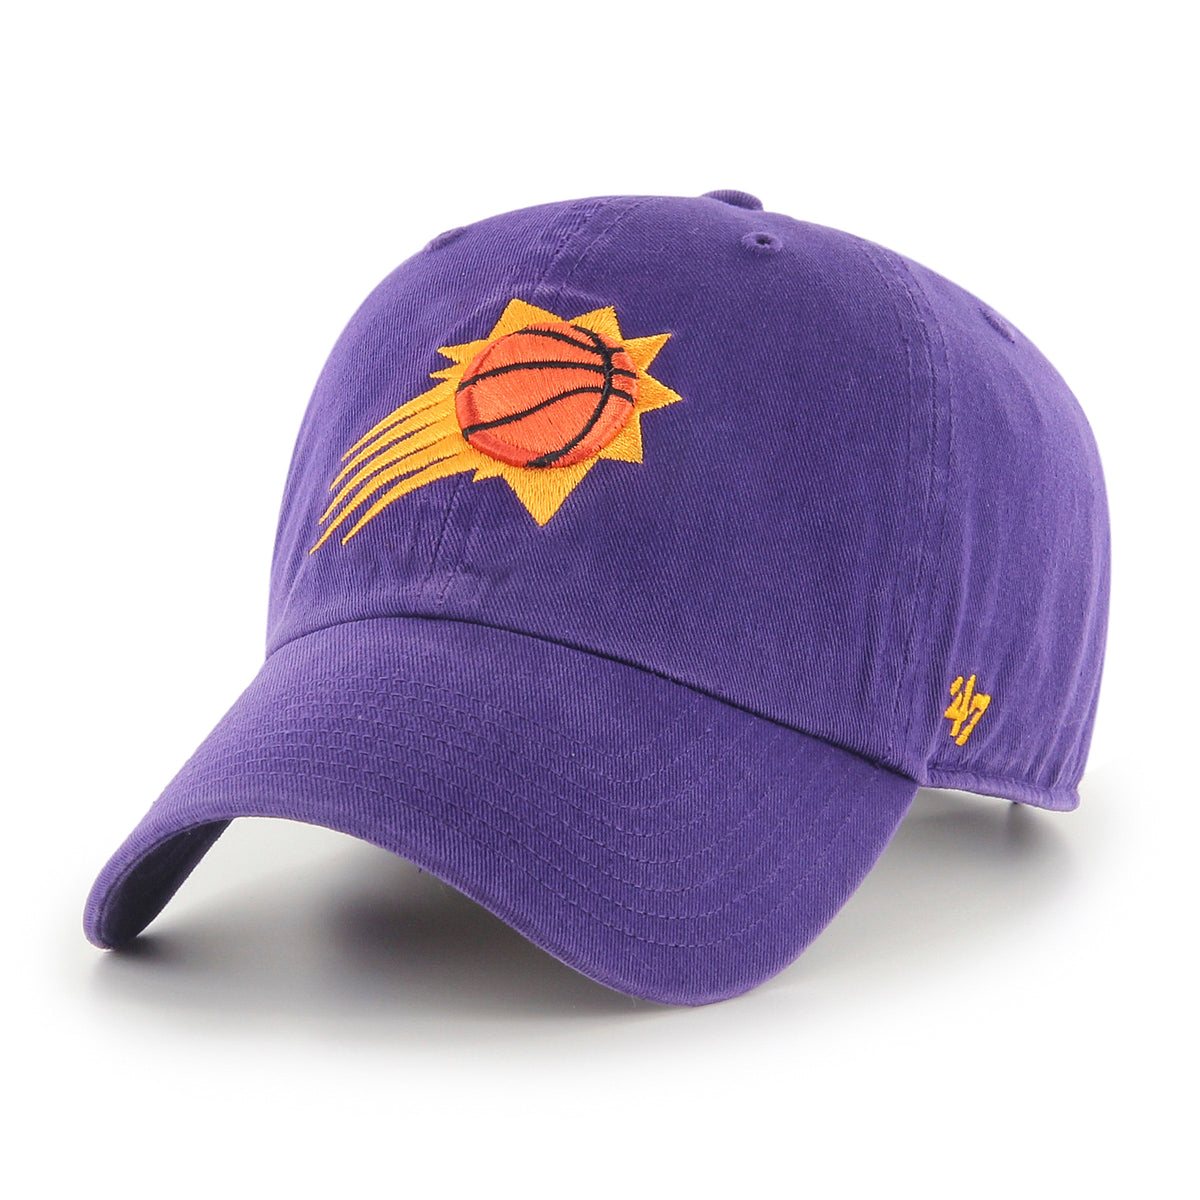 PHOENIX SUNS YOUTH '47 CLEAN UP